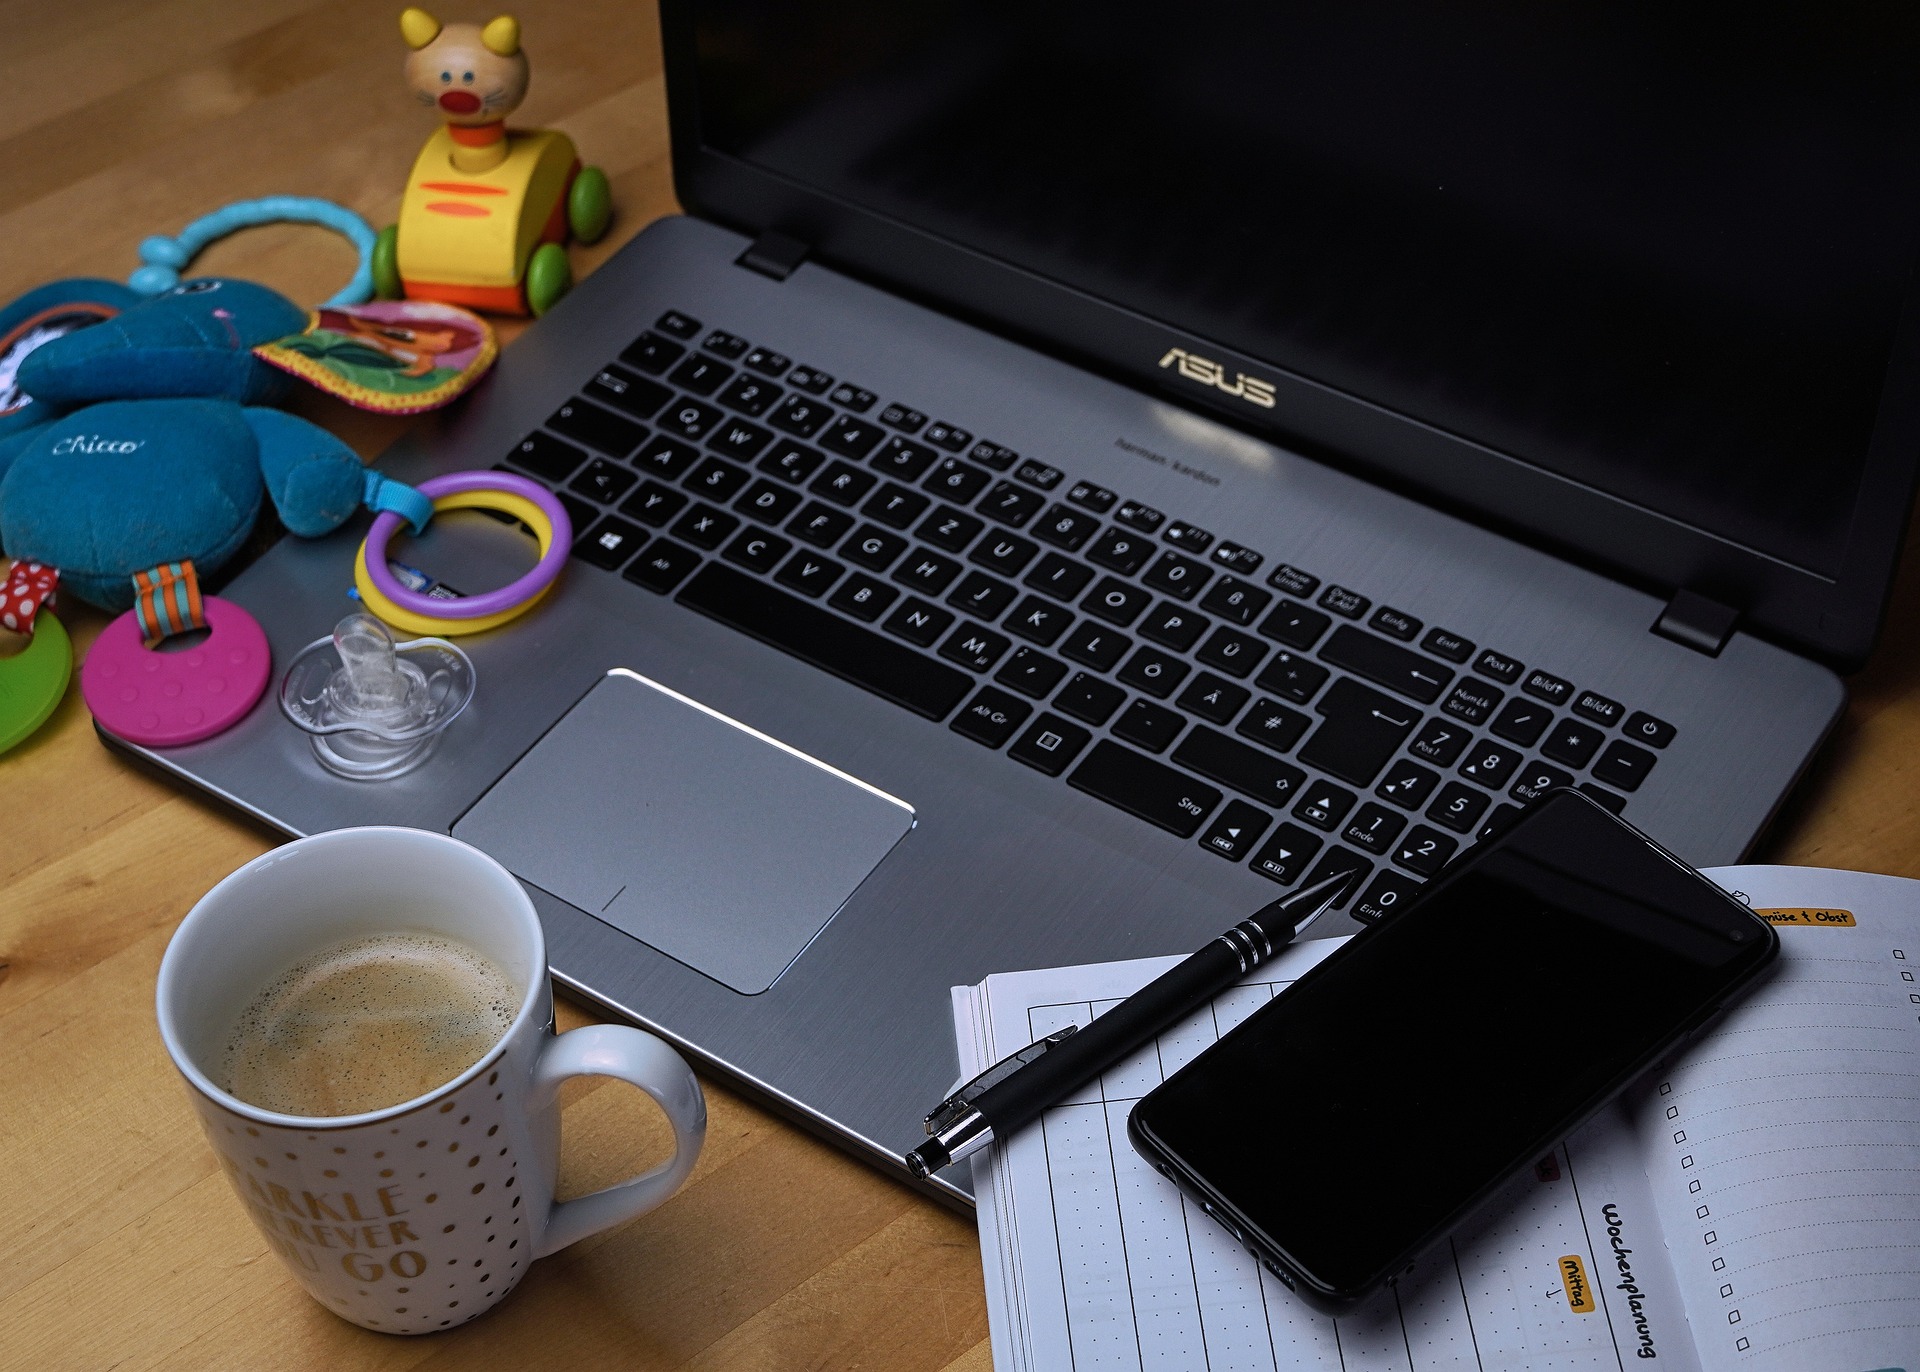 Laptop on a desk with a coffee cup and children's toys to show work-from-home and work-life balance.